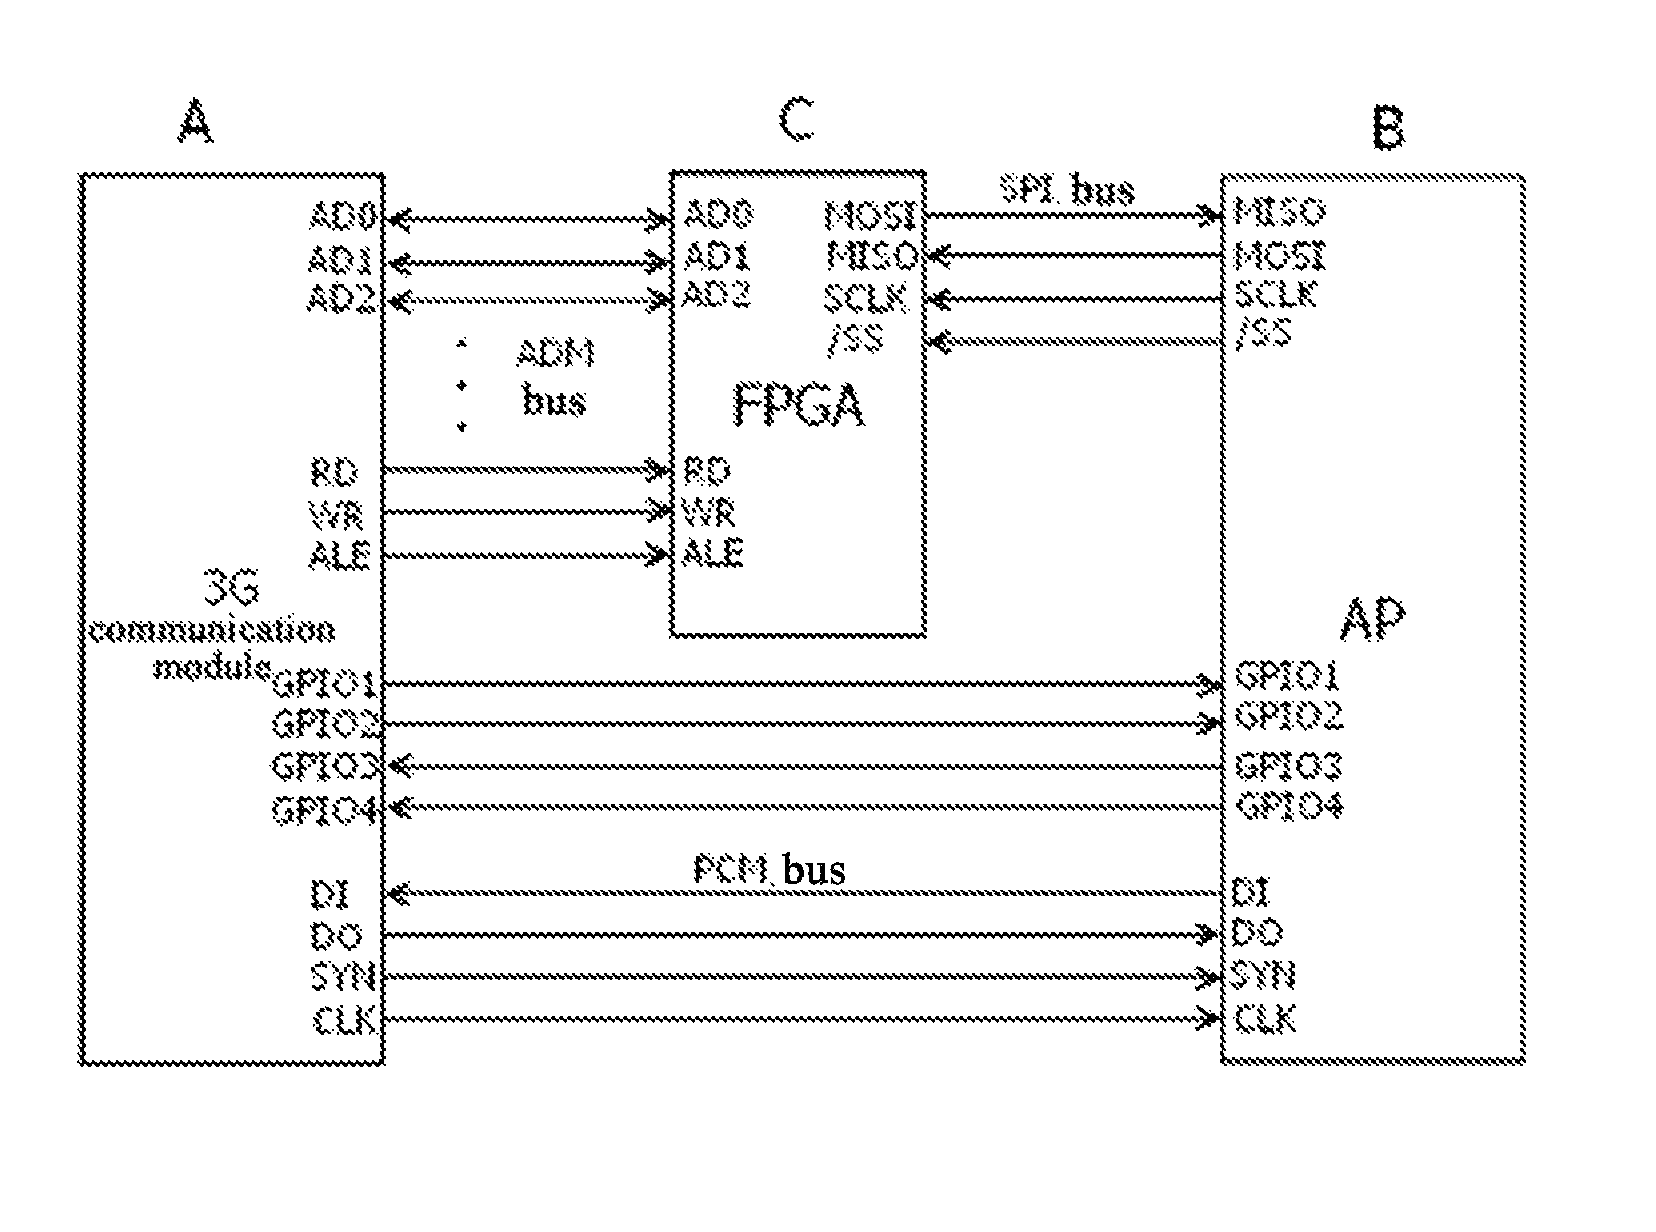 Device and method for enhancing flexibility of interface between 3G communication module and application processor